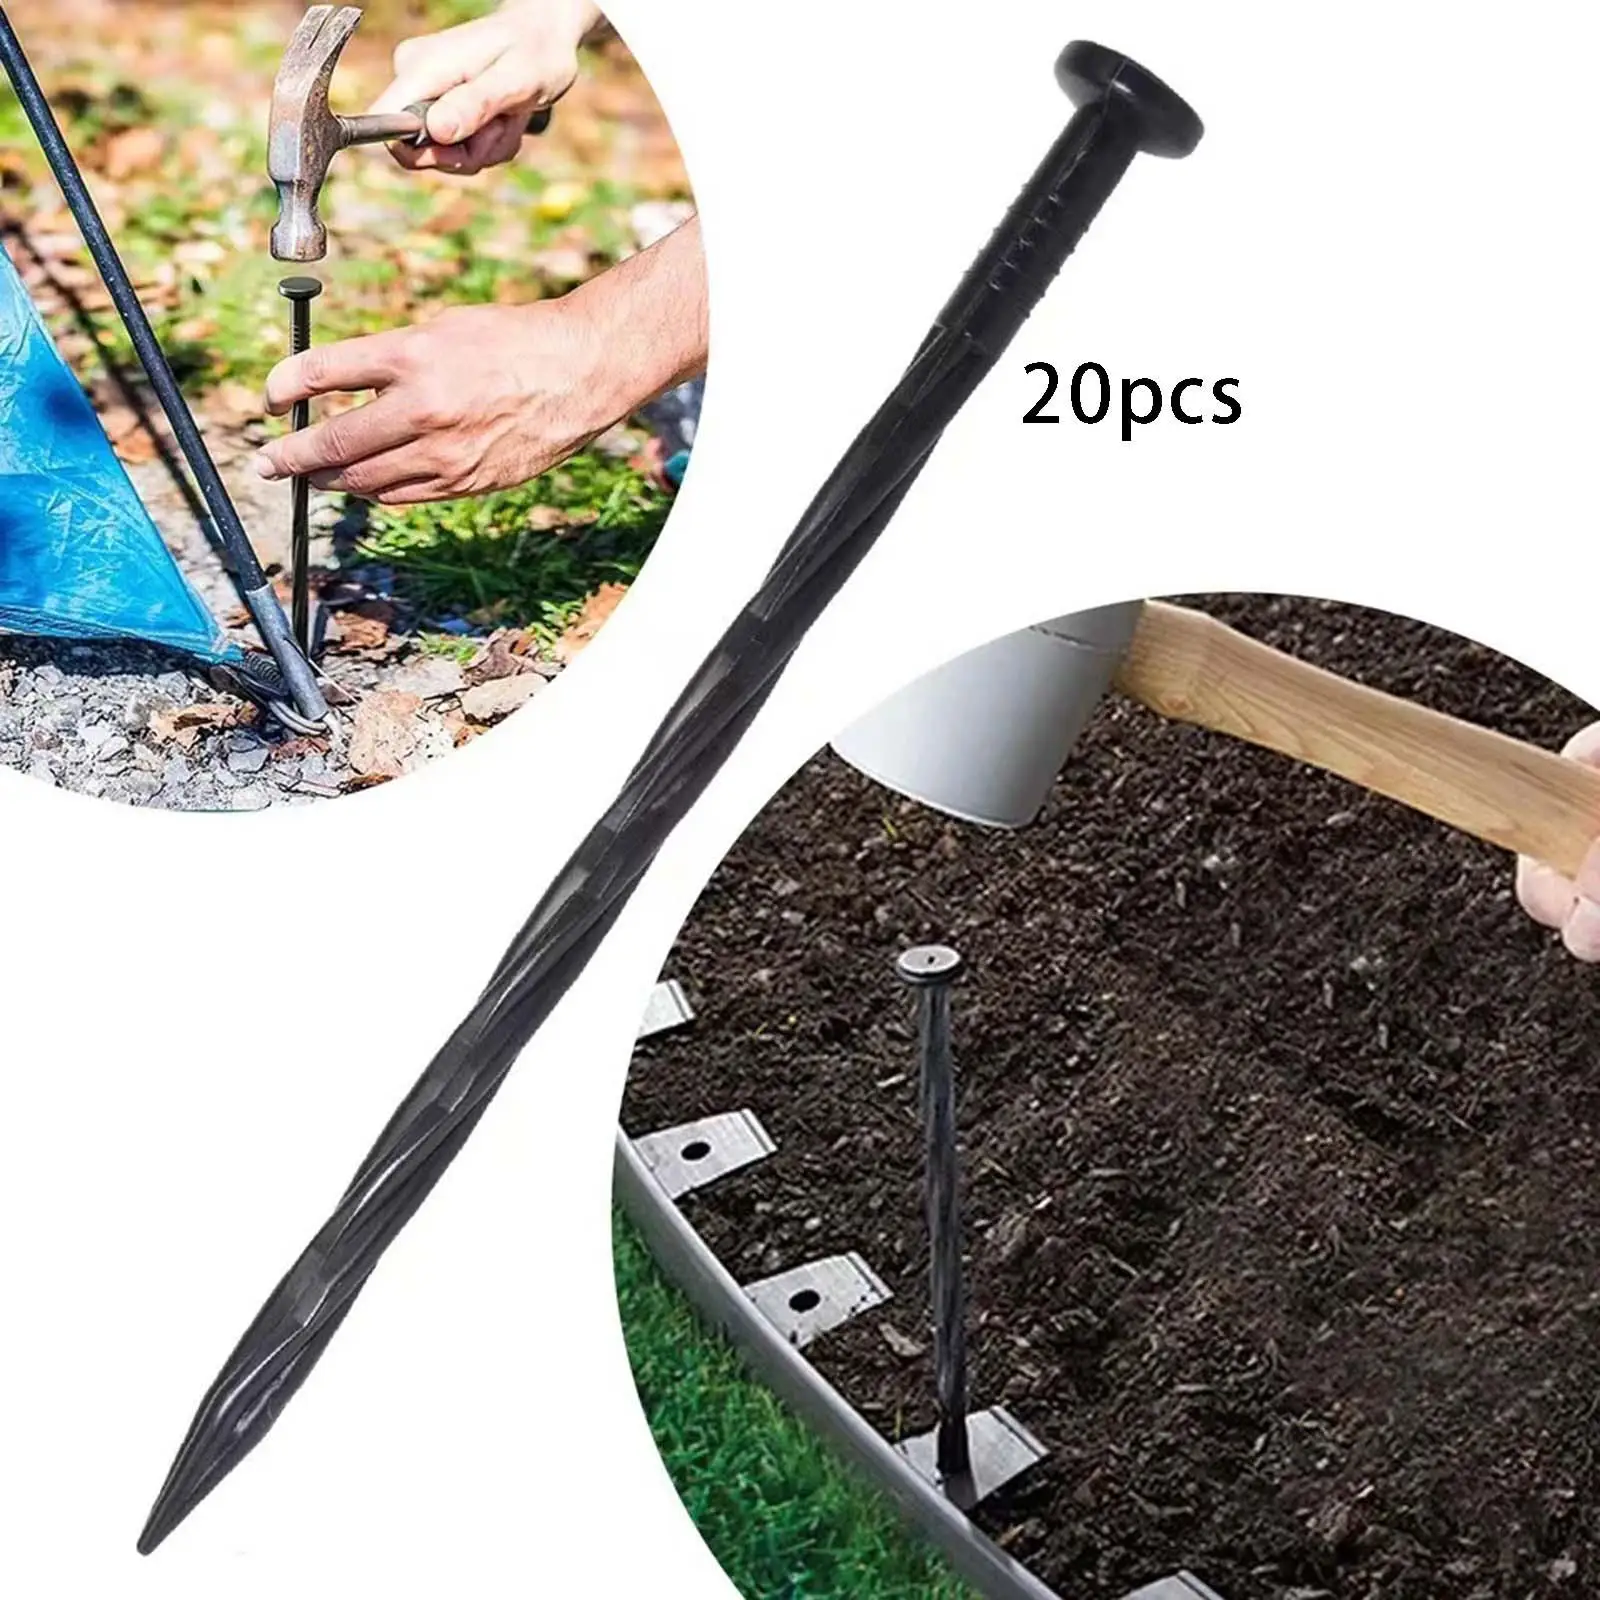 Fabric Securing Garden Pegs for Anti Pull Landscape Fabric and Weed Membrane Matting Ground Anchor and Securing Netting